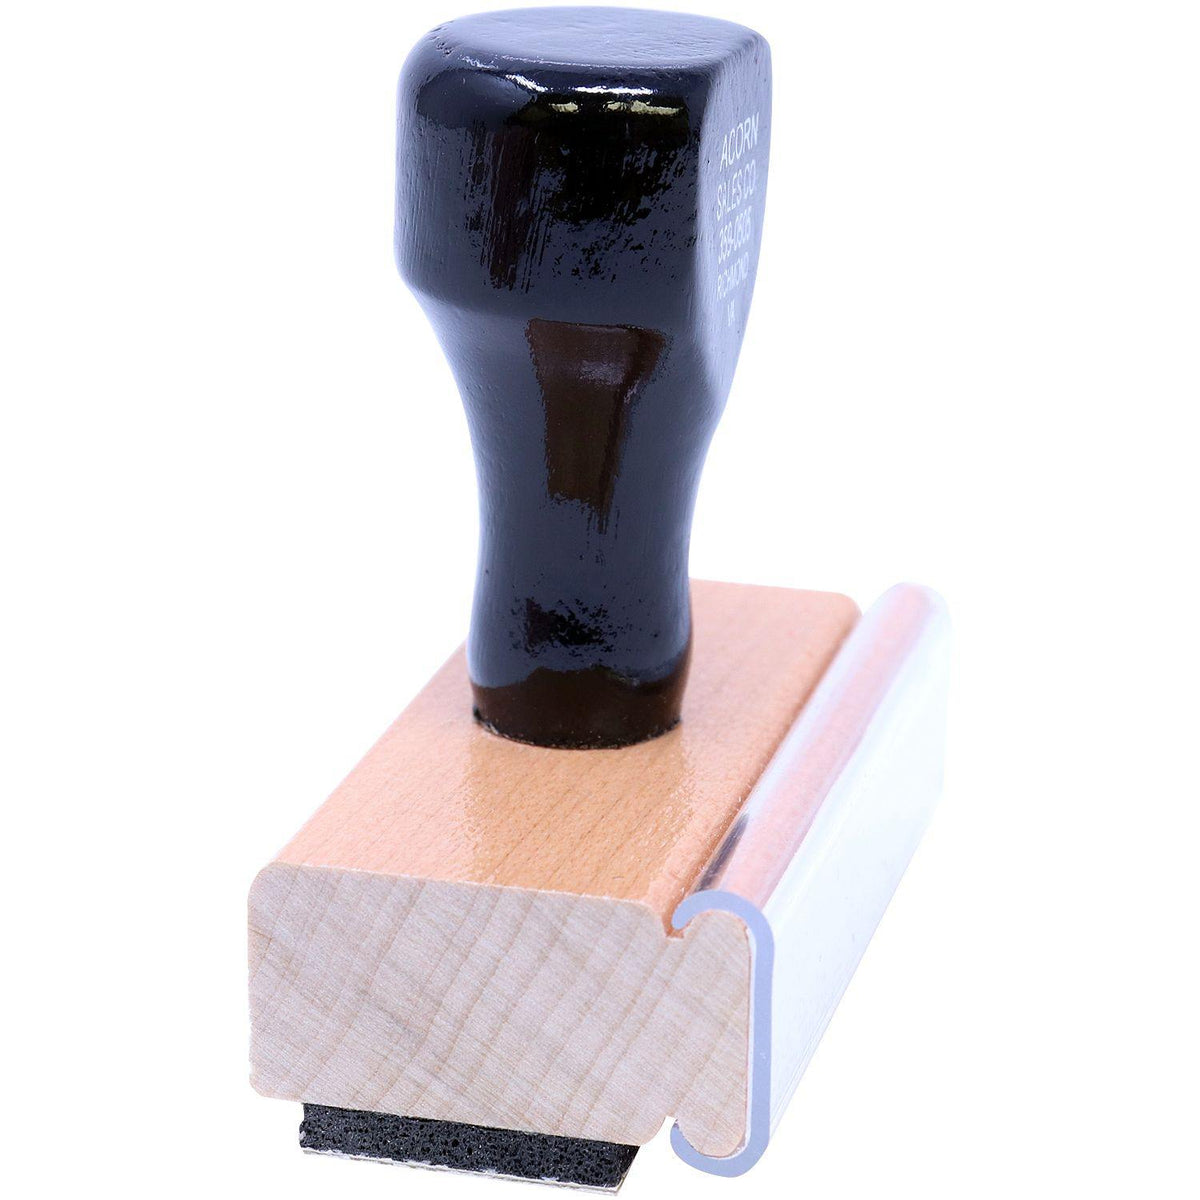 Side View of Large Bold Distributed Rubber Stamp at an Angle